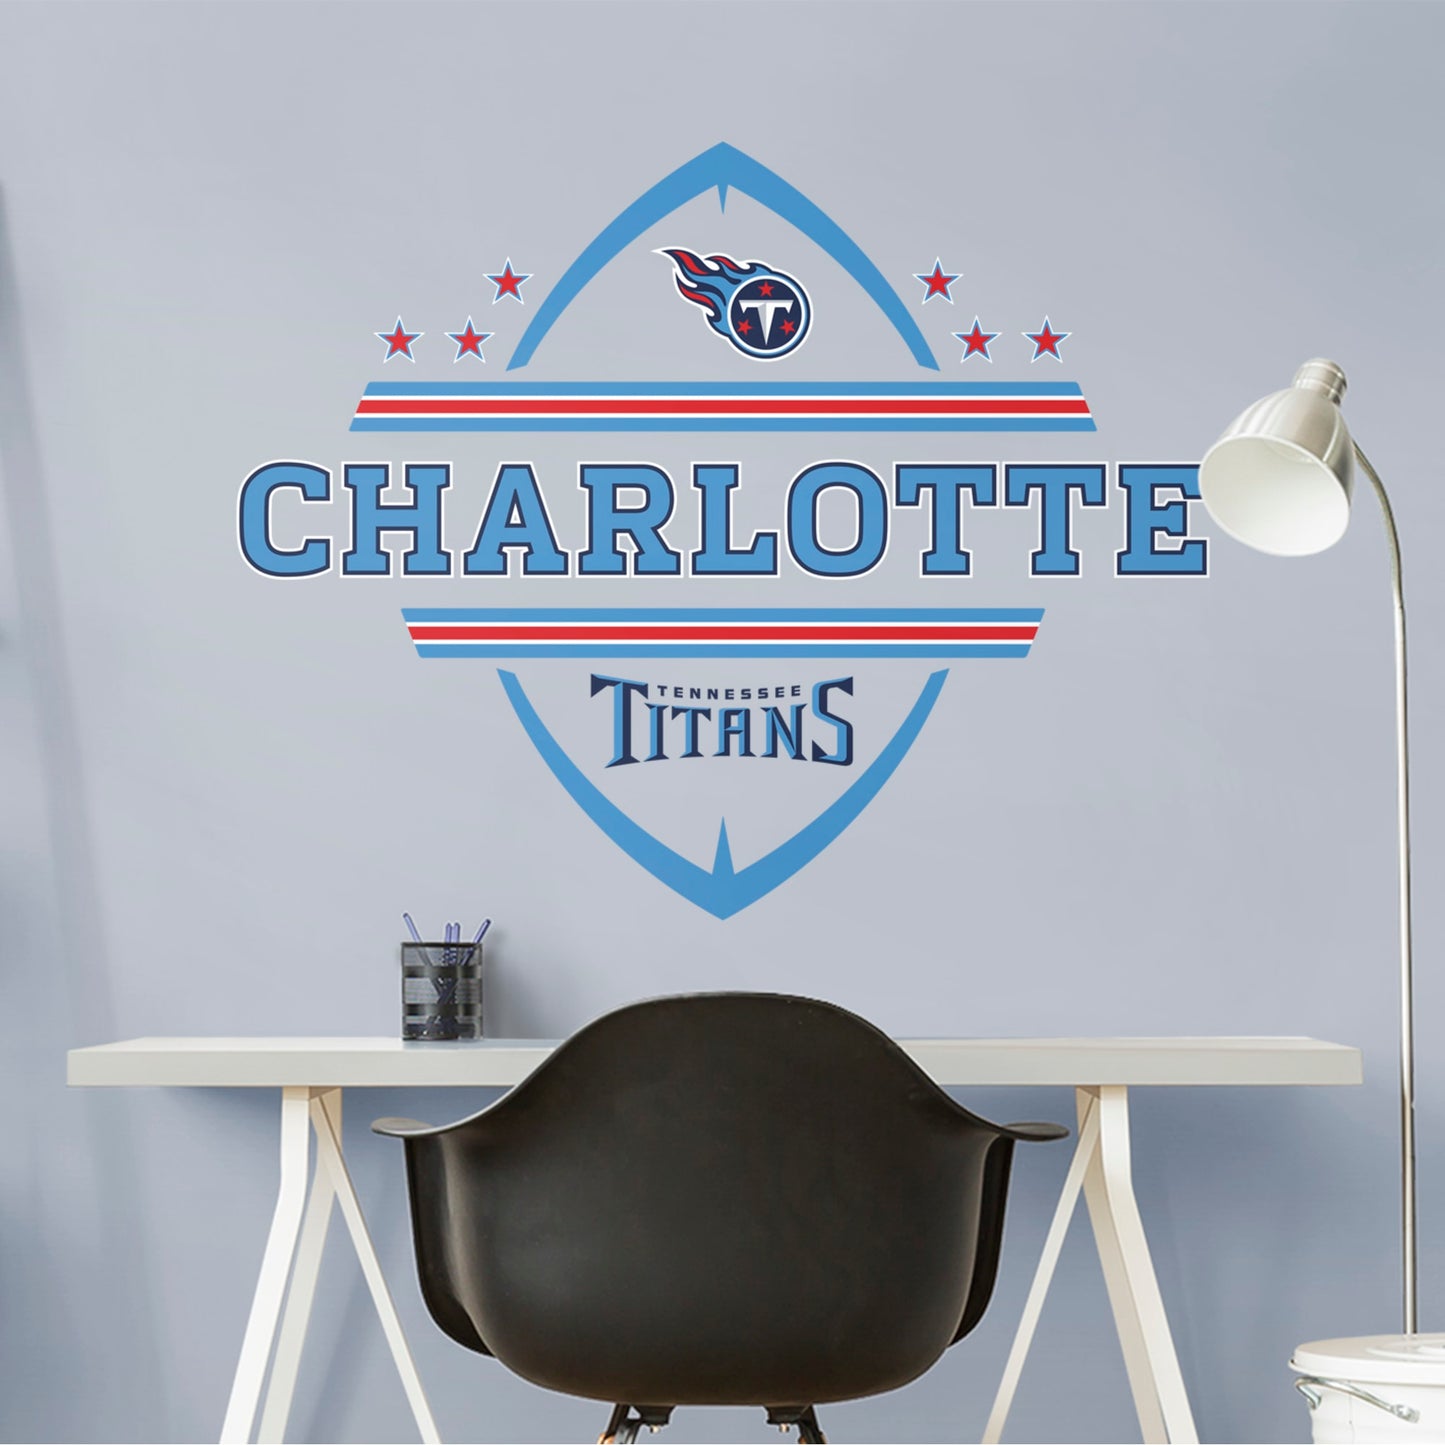 Tennessee Titans: Personalized Name - Officially Licensed NFL Transfer Decal